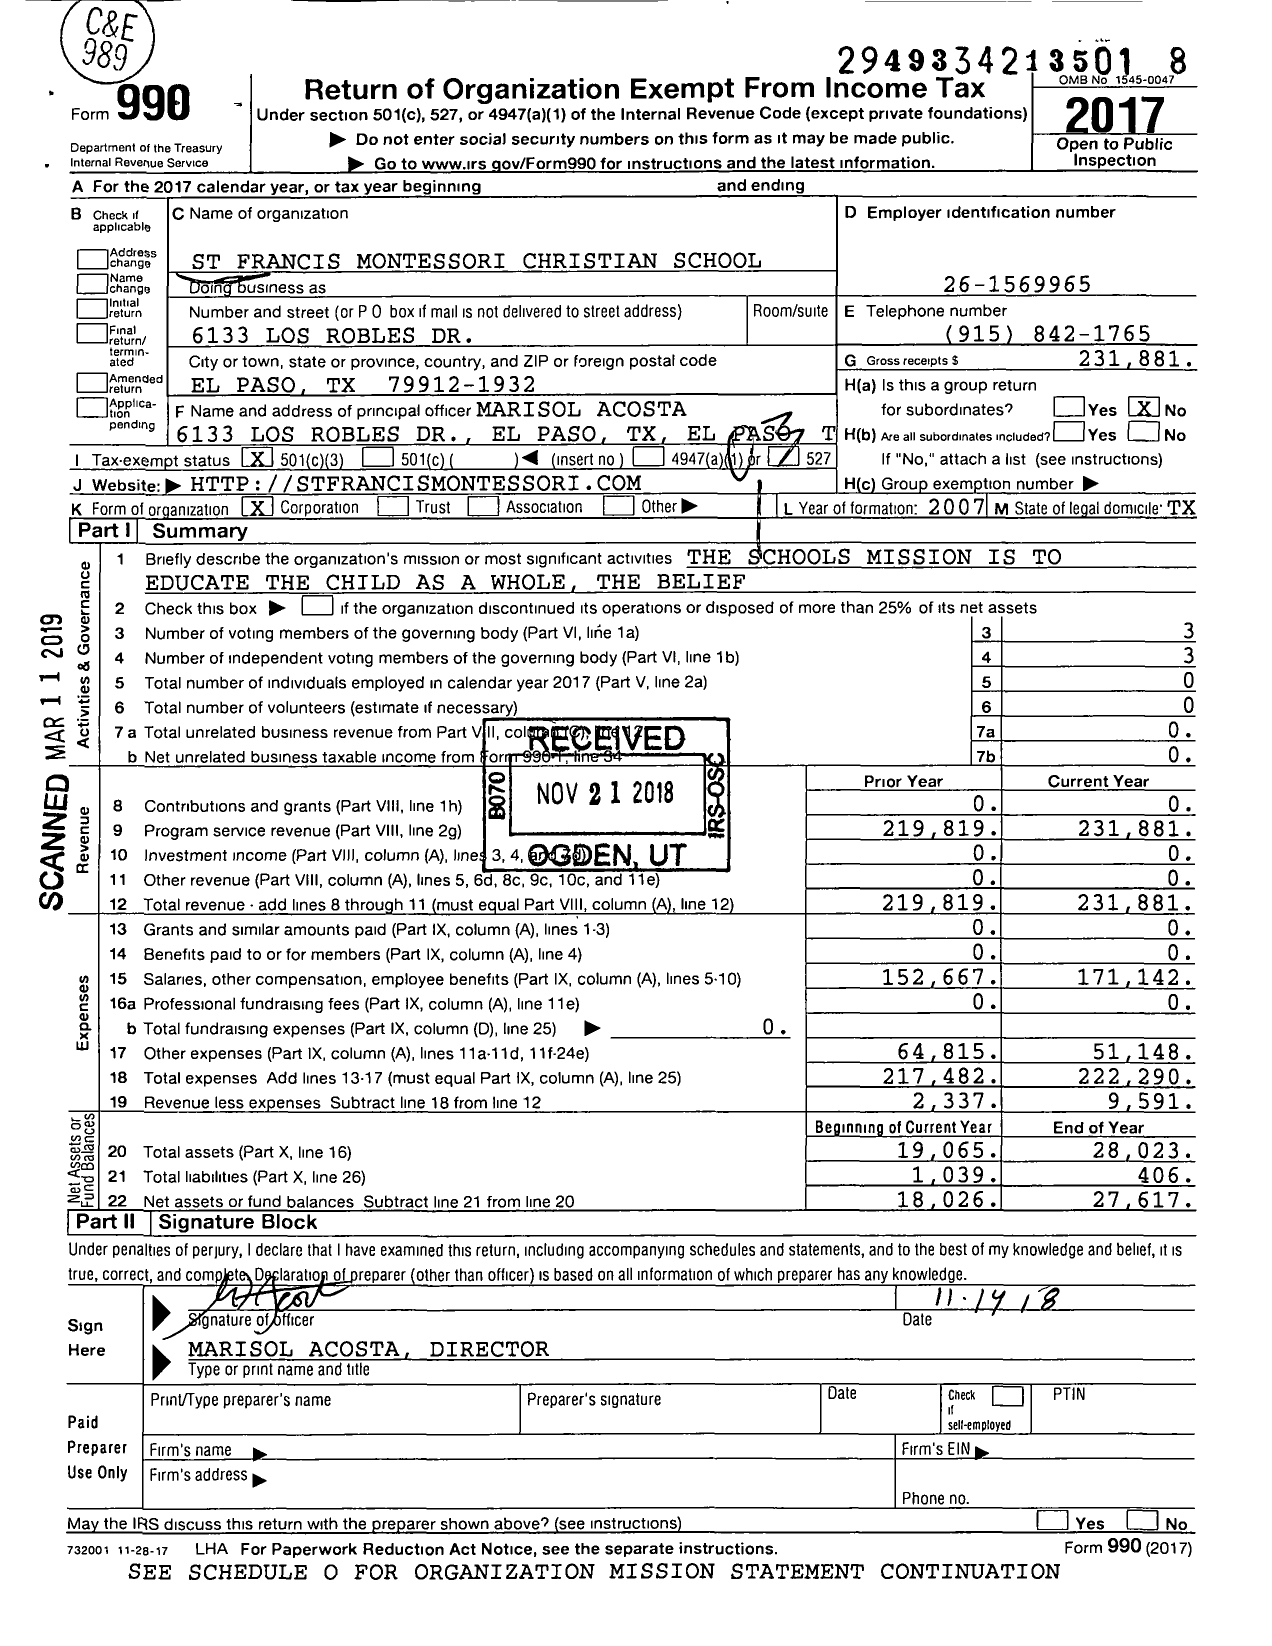 Image of first page of 2017 Form 990 for Saint Francis Montessori Christian School